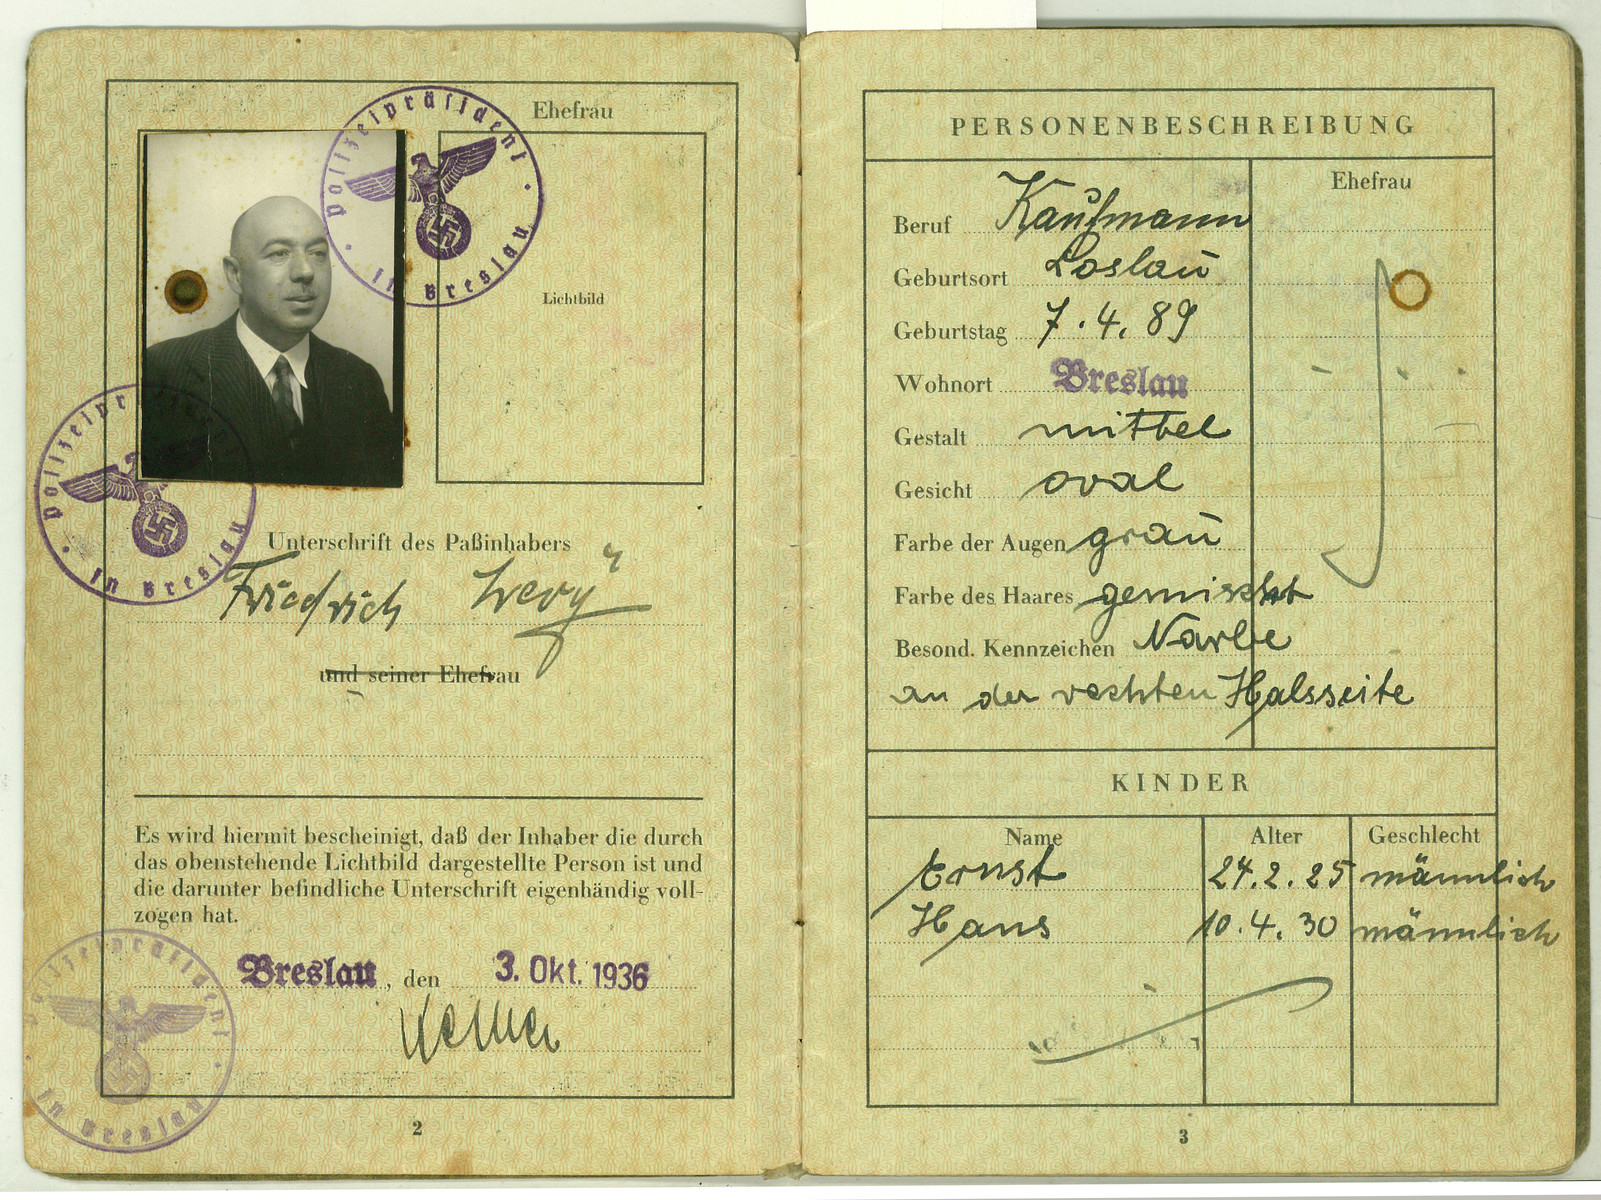 Identification papers issued to Friedrich Levy.